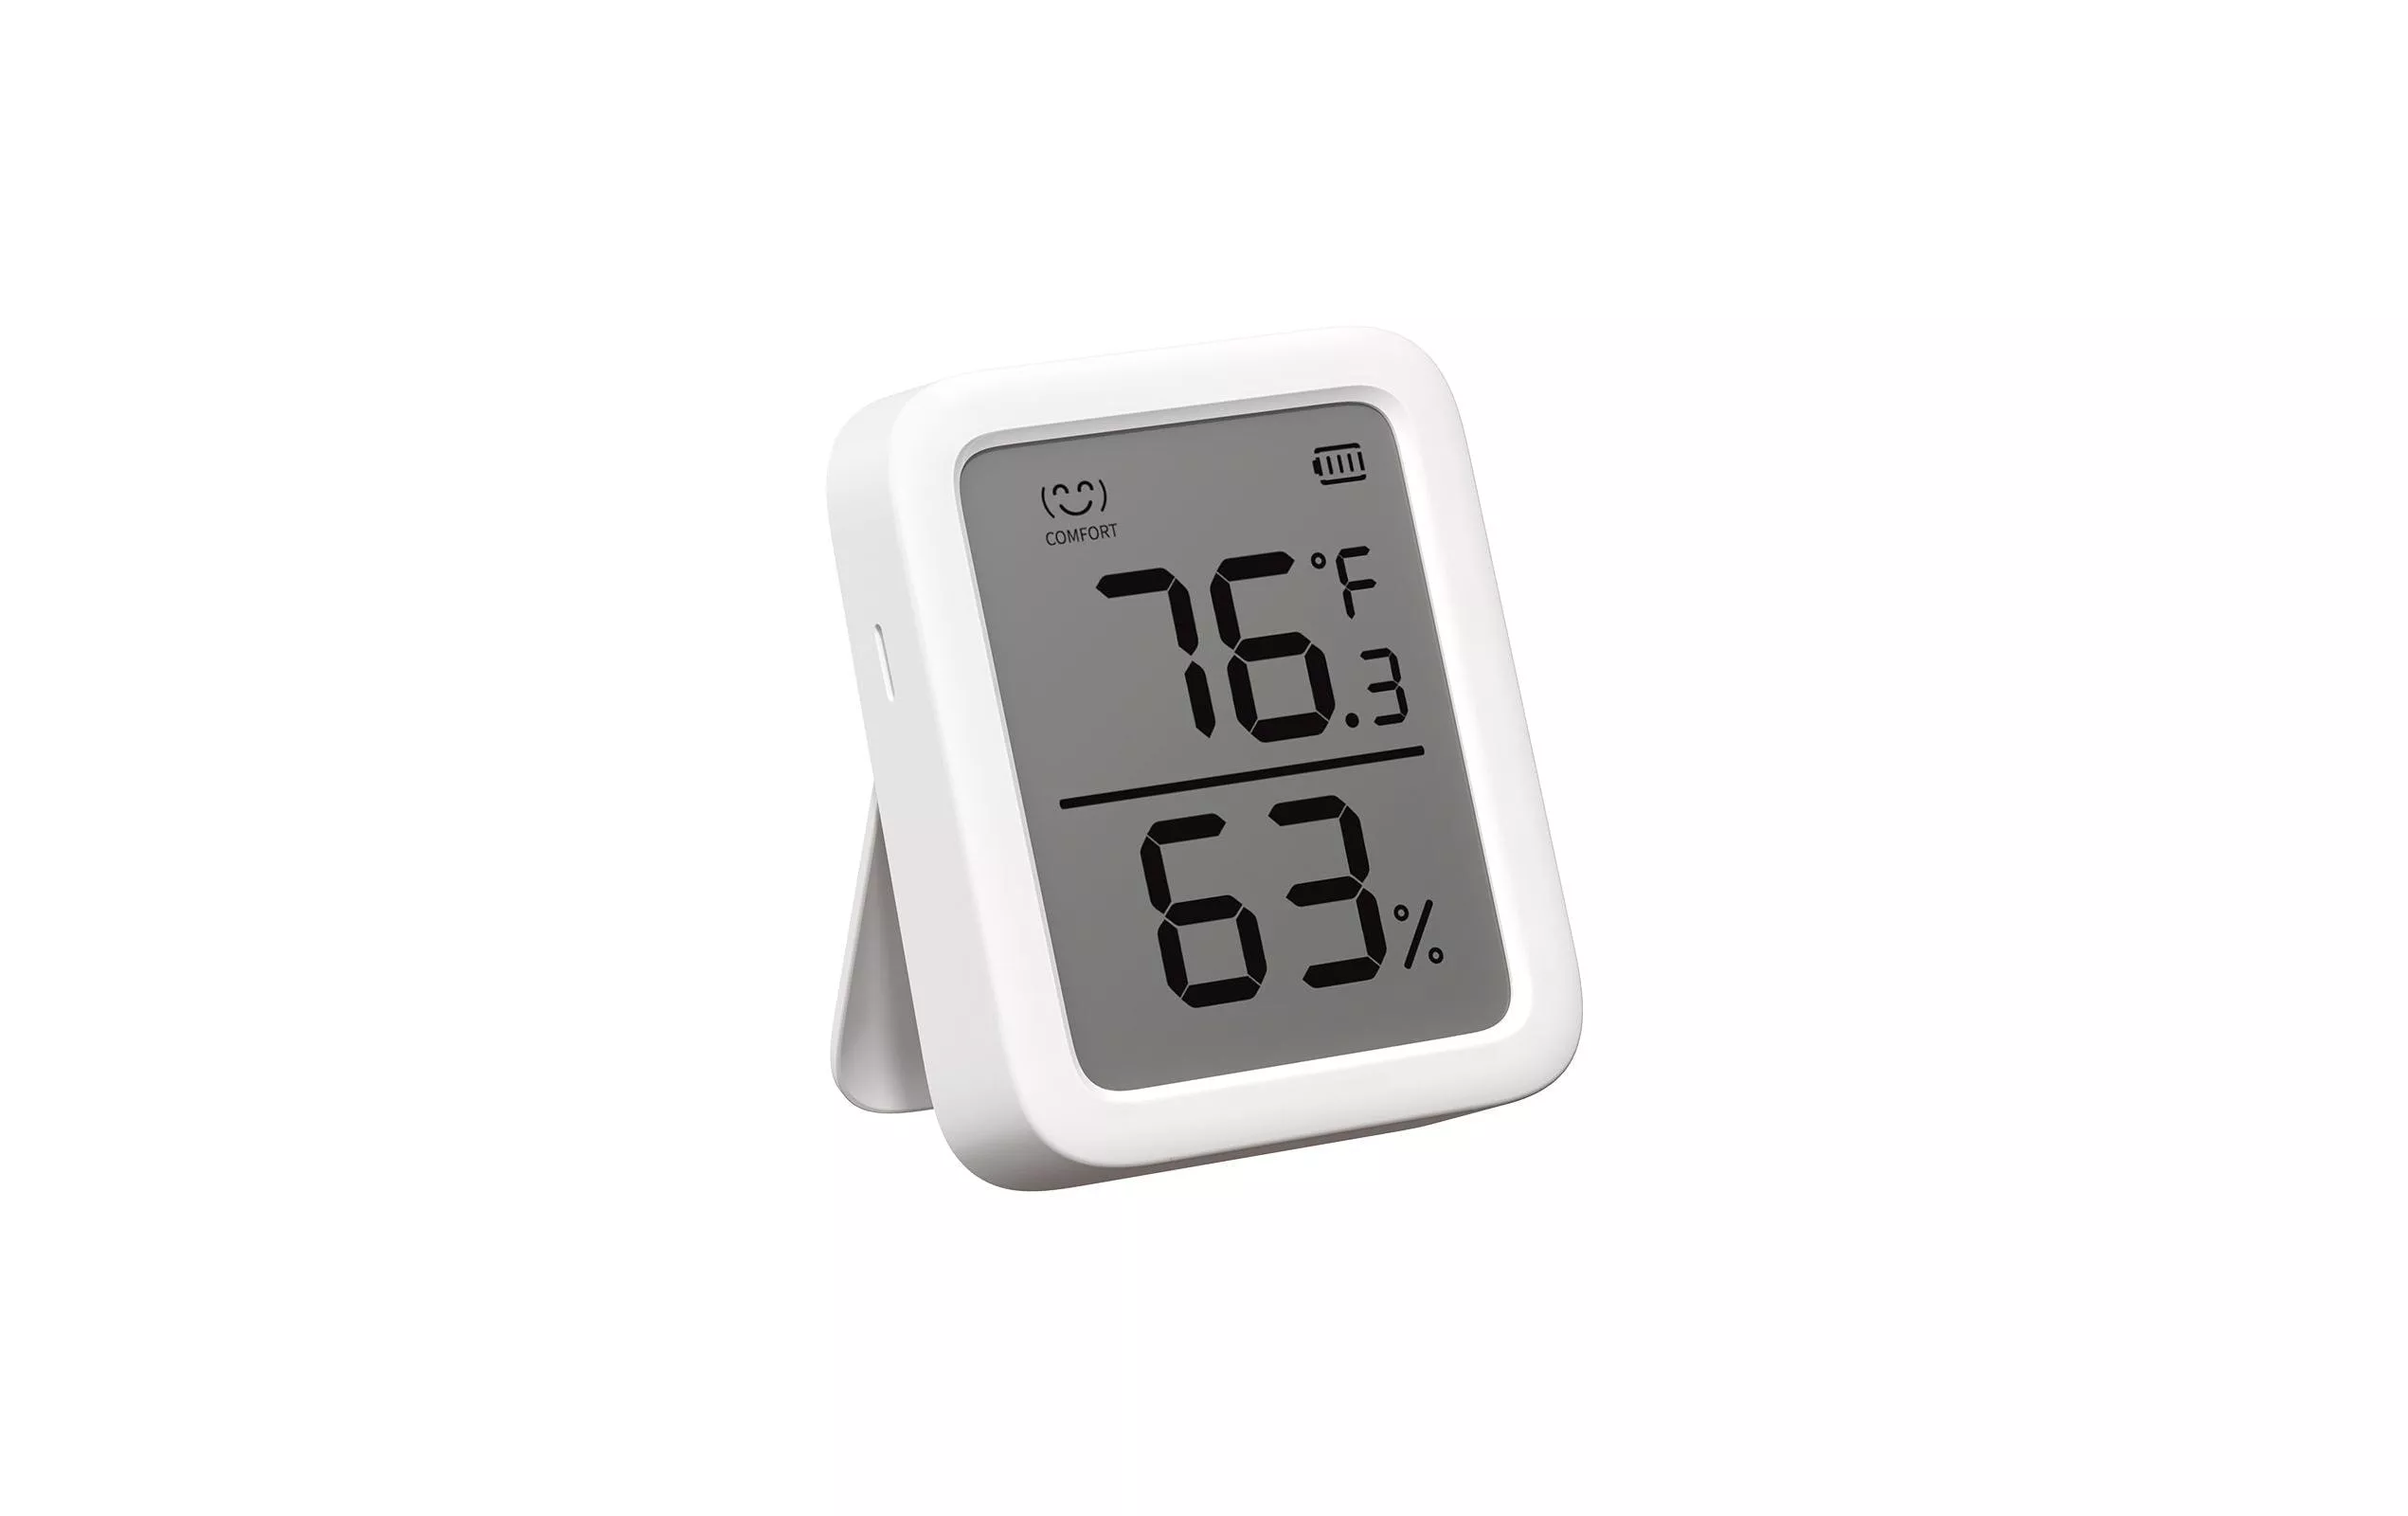 Smartes Innen-Thermometer, Weiss, Bluetooth